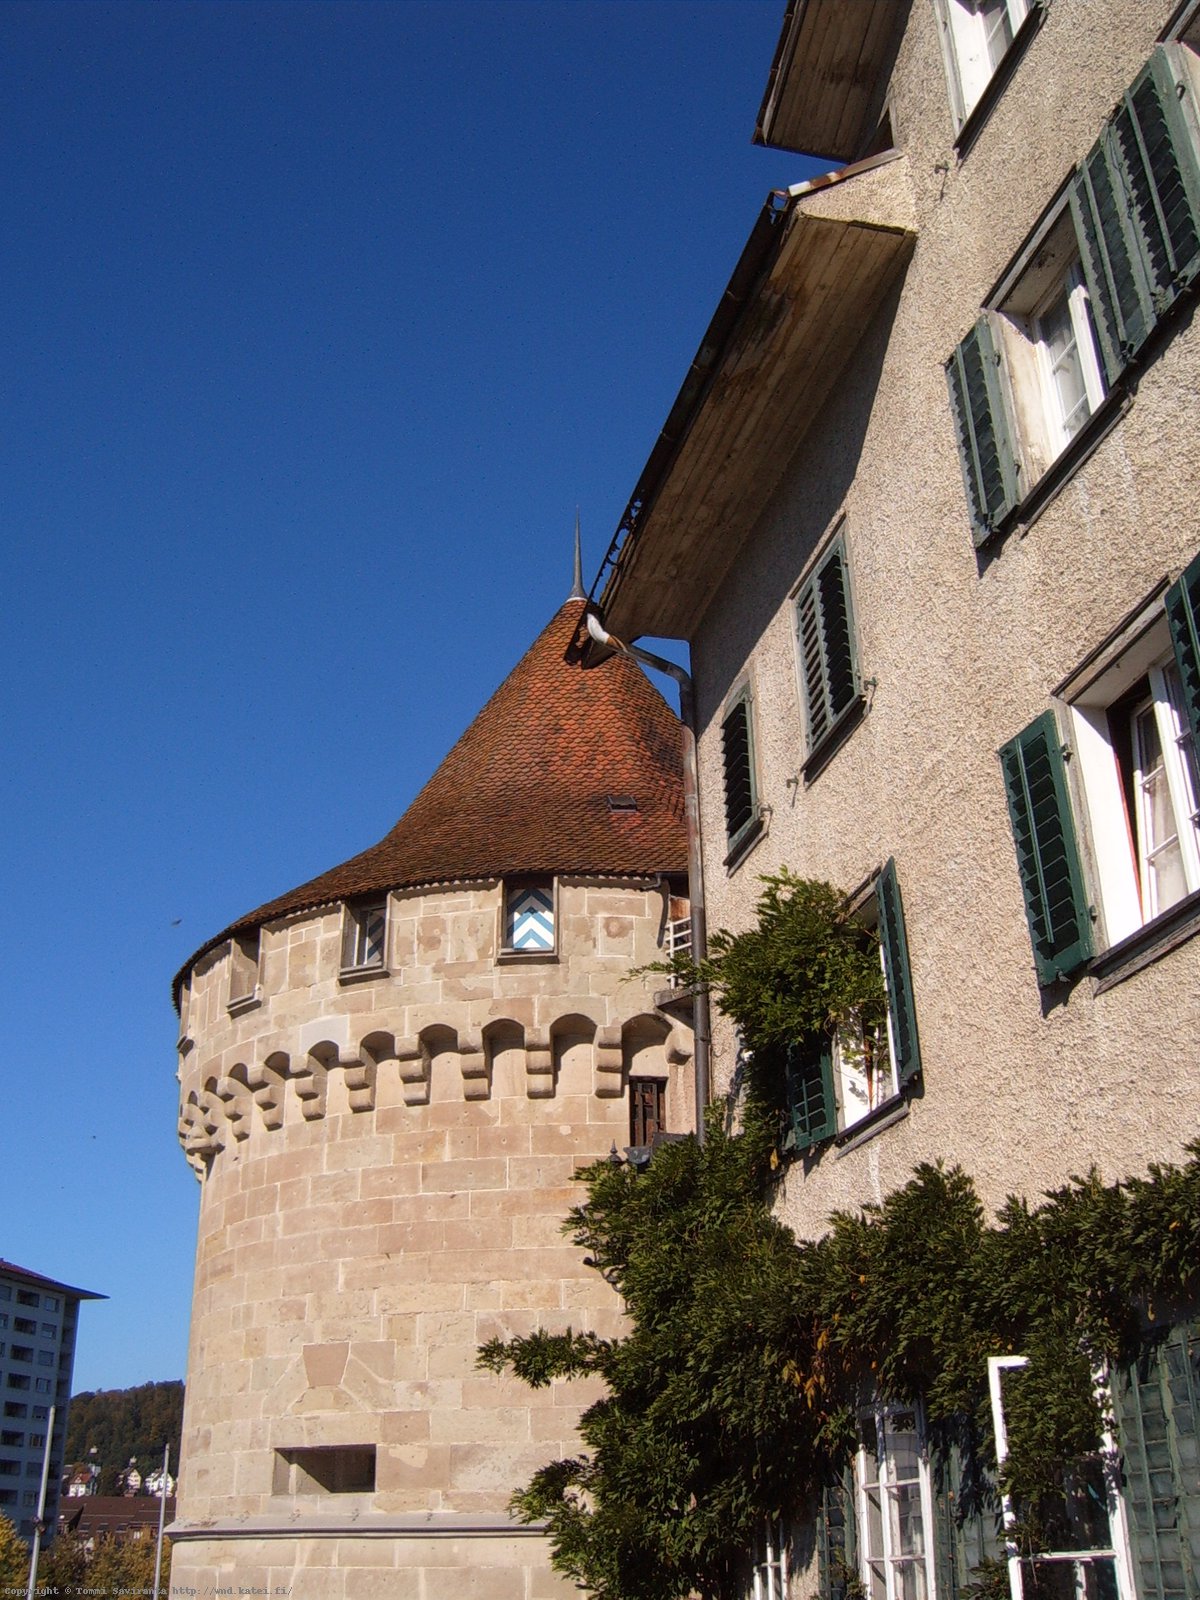 Day #3: The old city wall tower